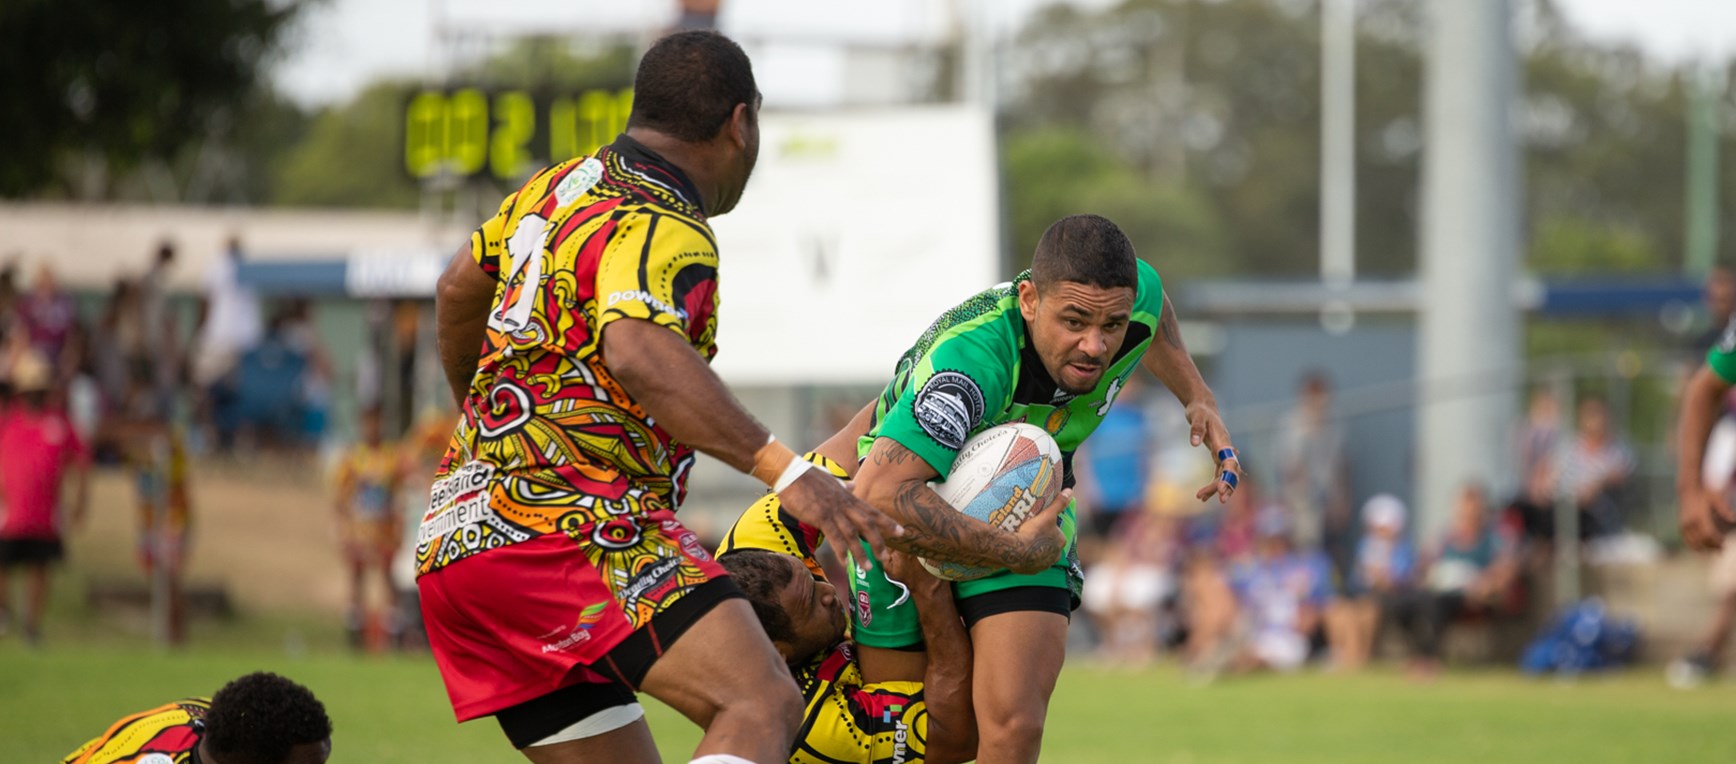 In pictures: Murri Carnival winners crowned